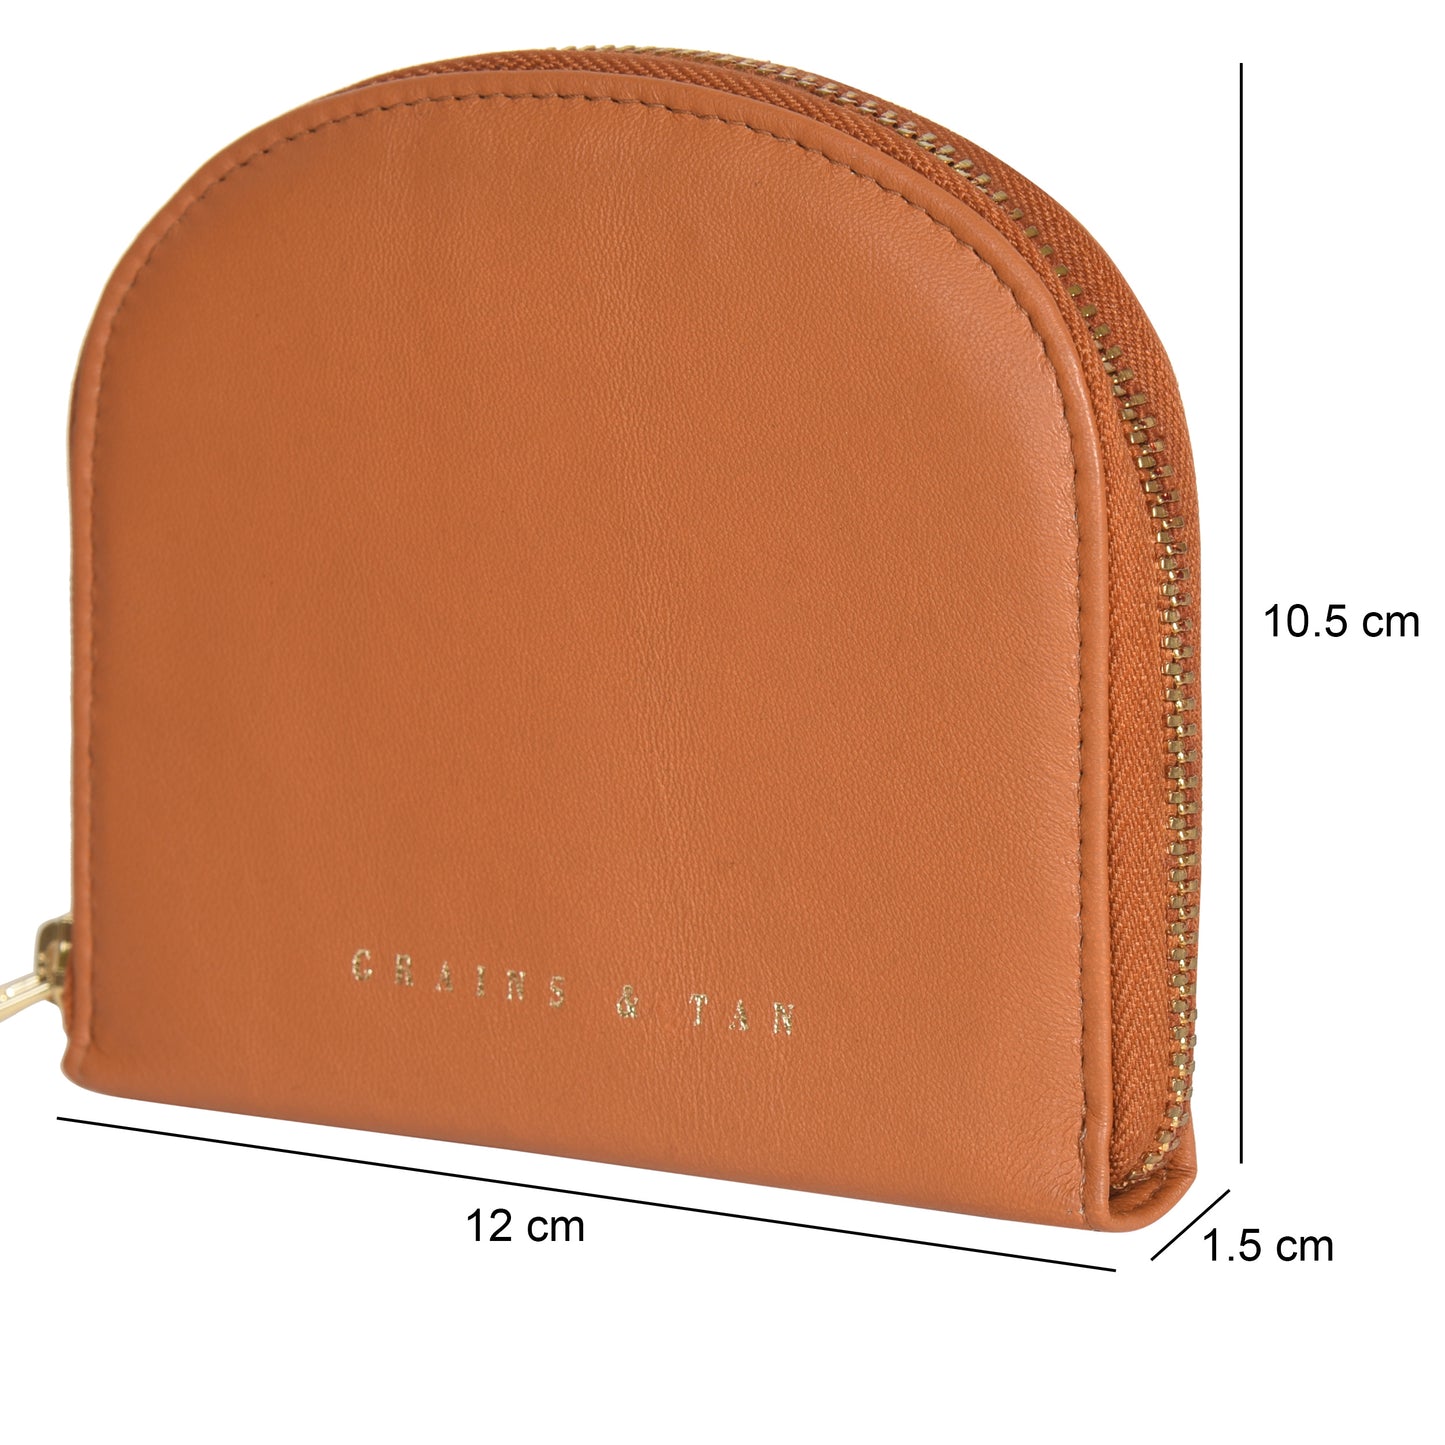 GT-007: G&T Full-grain Leather Crescent-Shaped Mini Ladies Wallet, Card Holder